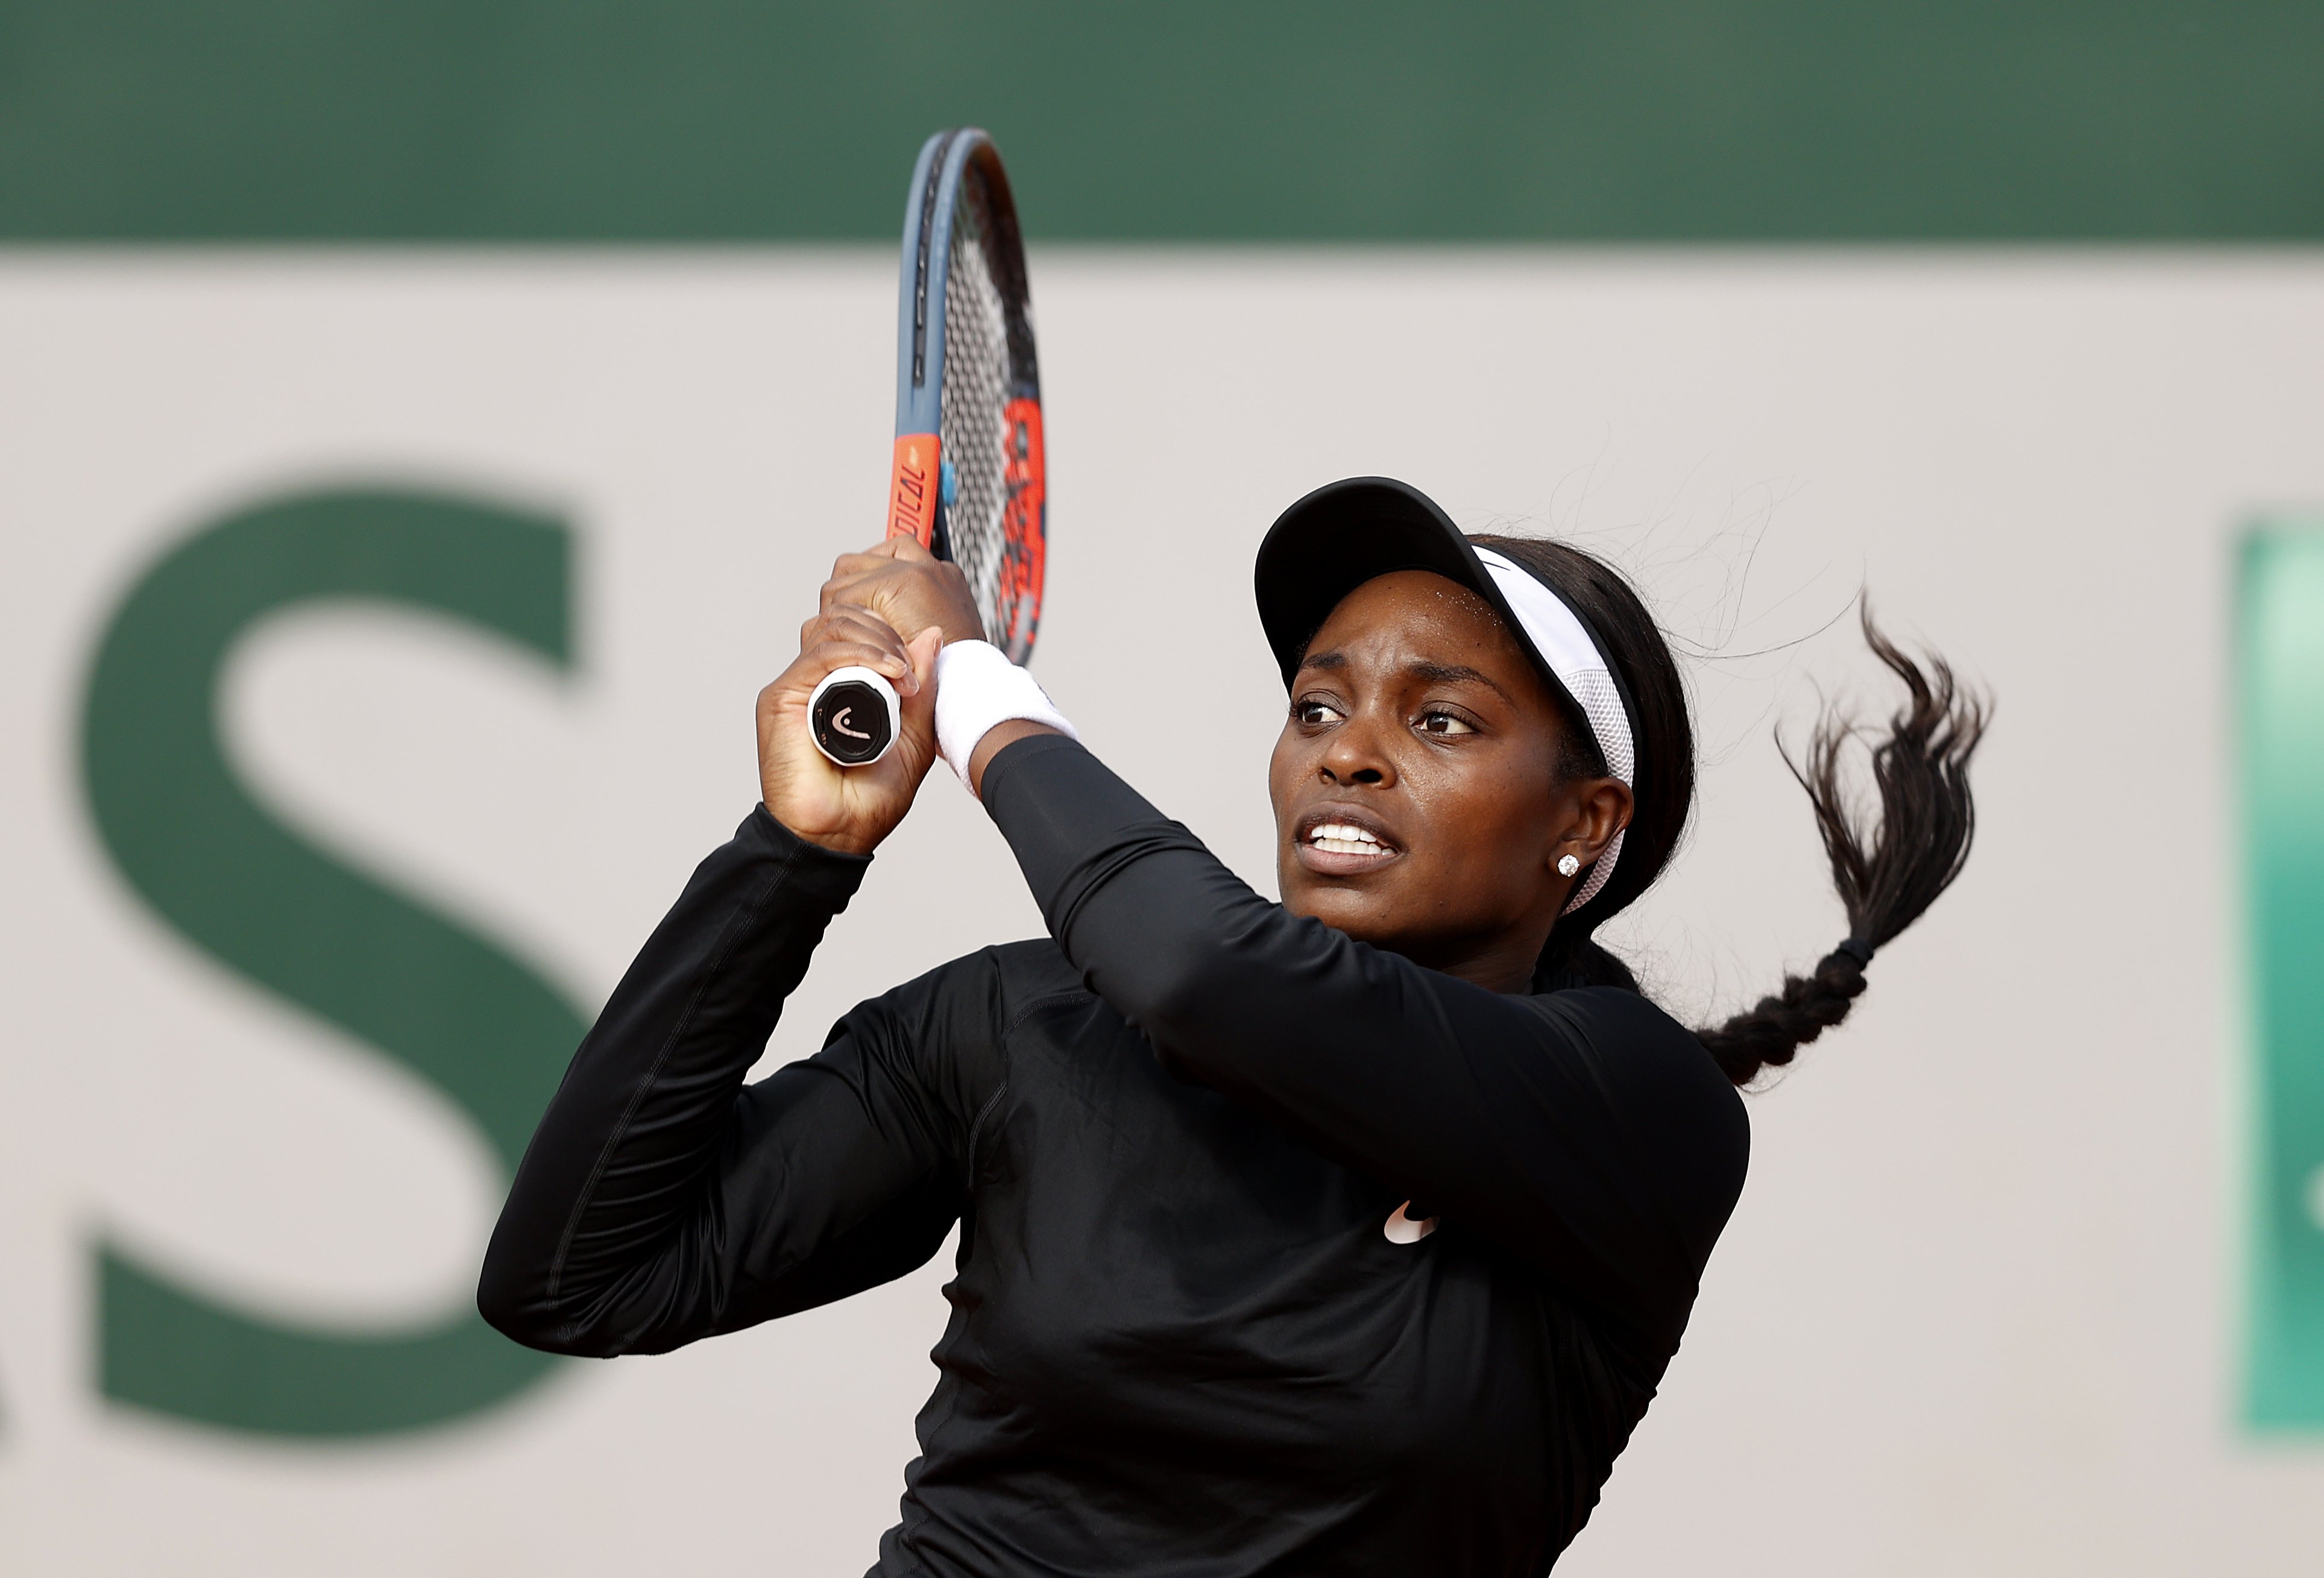 Sloane Stephens plays during the  2020 French Open at Roland Garros on October 01, 2020 in Paris, France. | Source: Getty Images